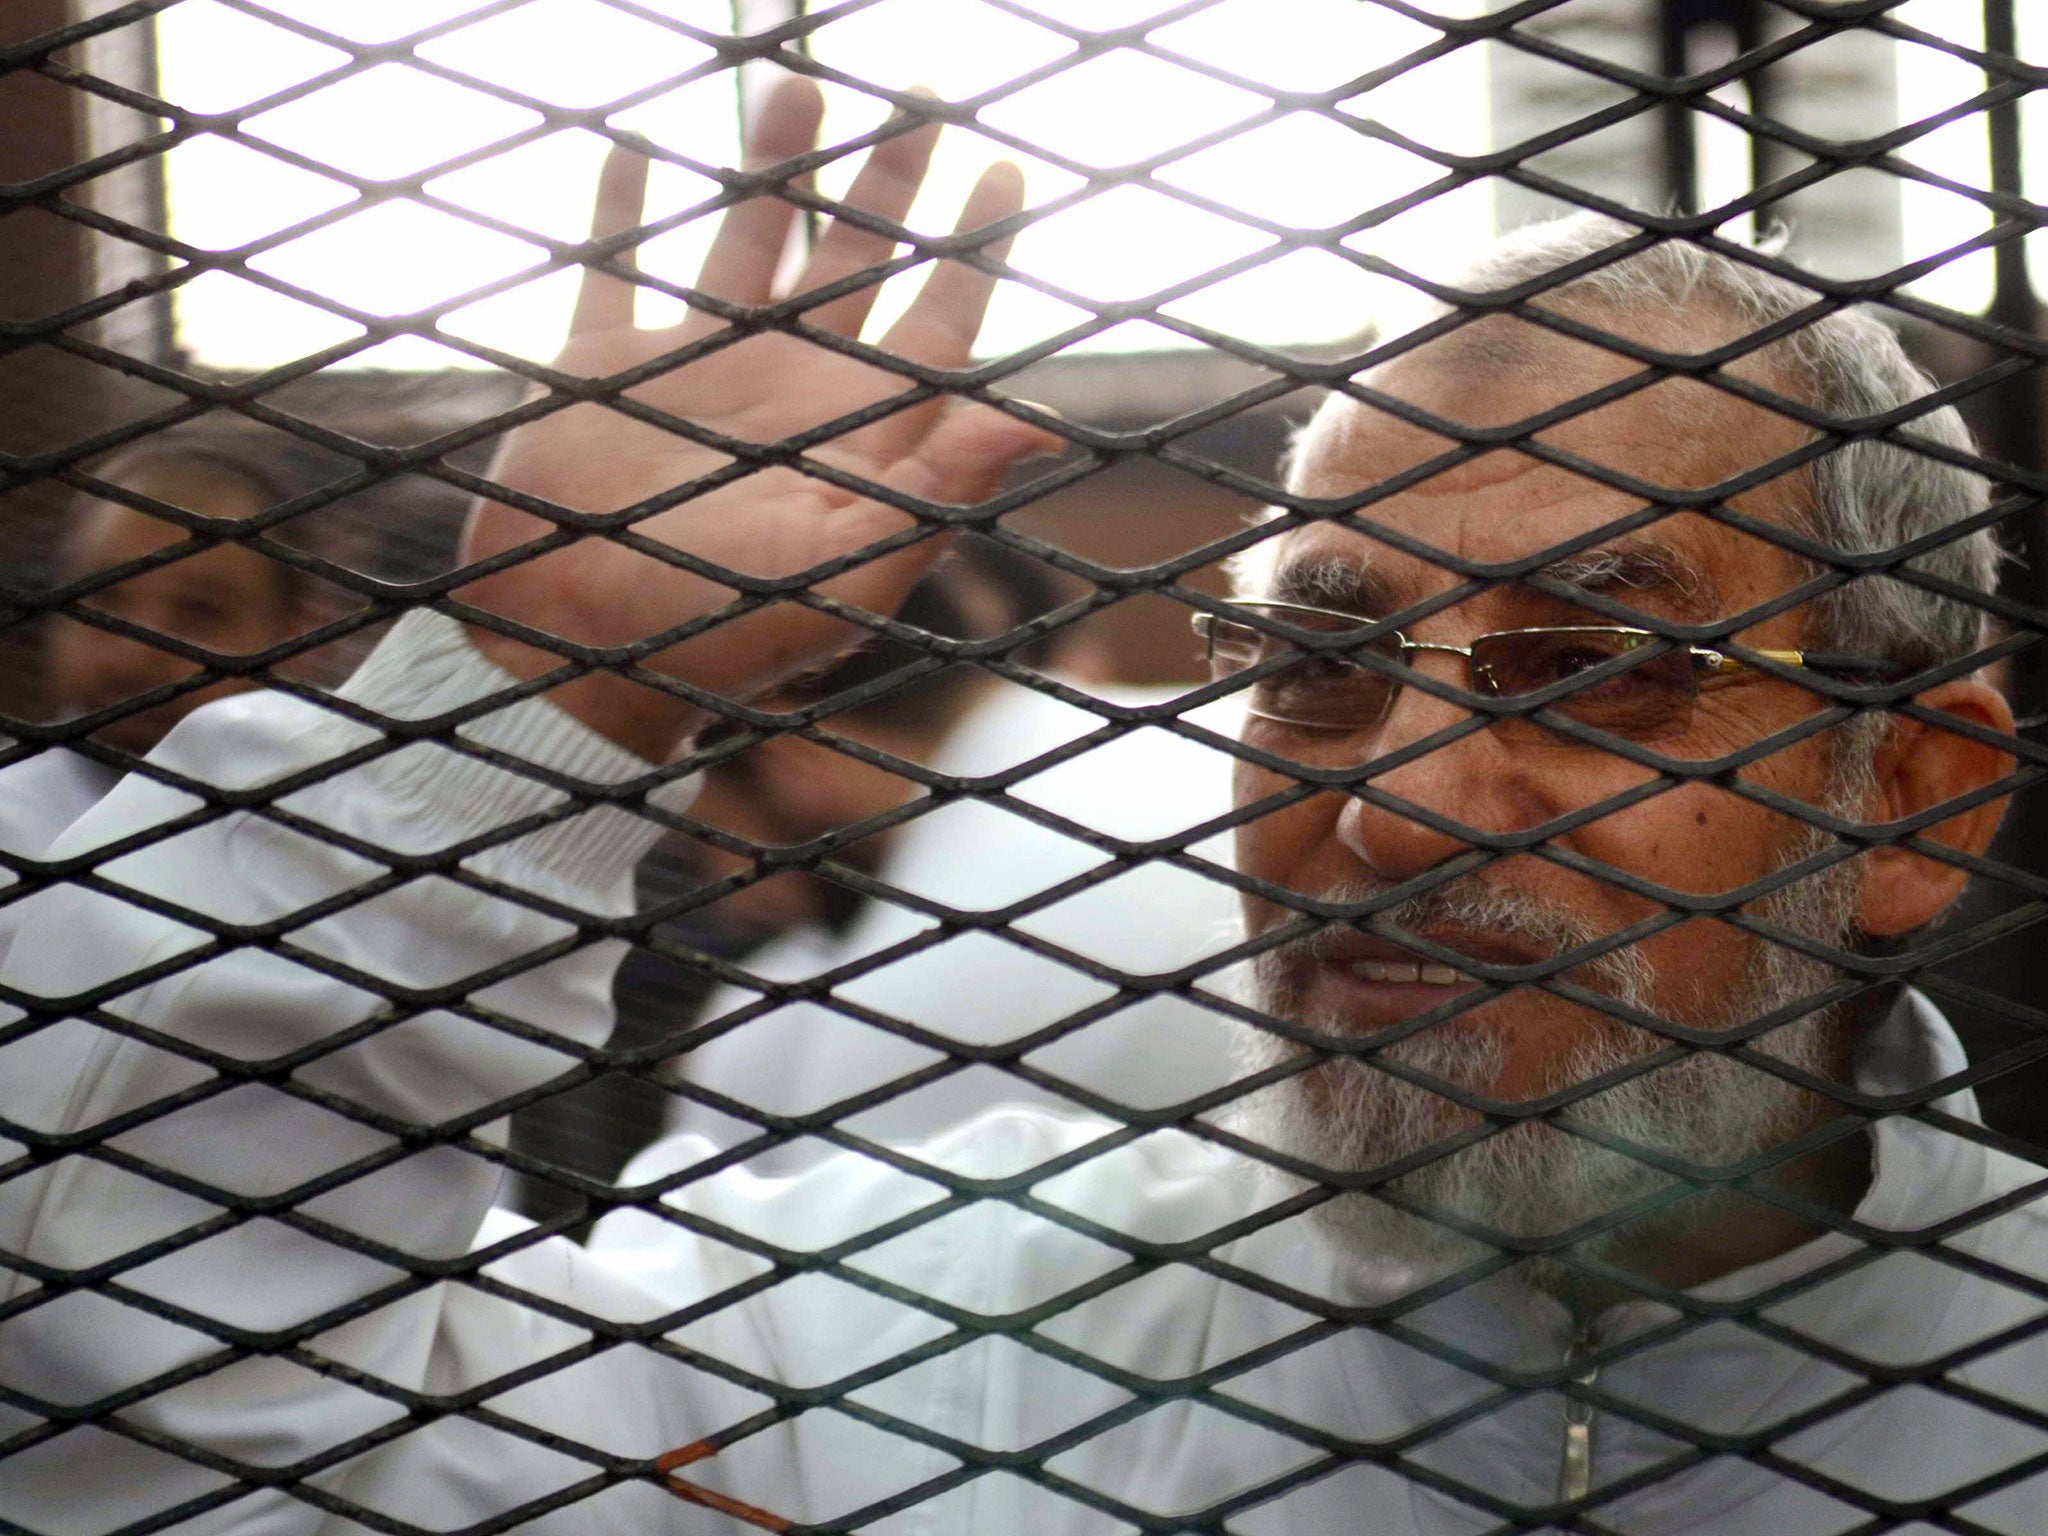 Mohamed Badie and 14 others were sentenced to life in jail on charges of murder and inciting violence during a protest near Cairo in 2013